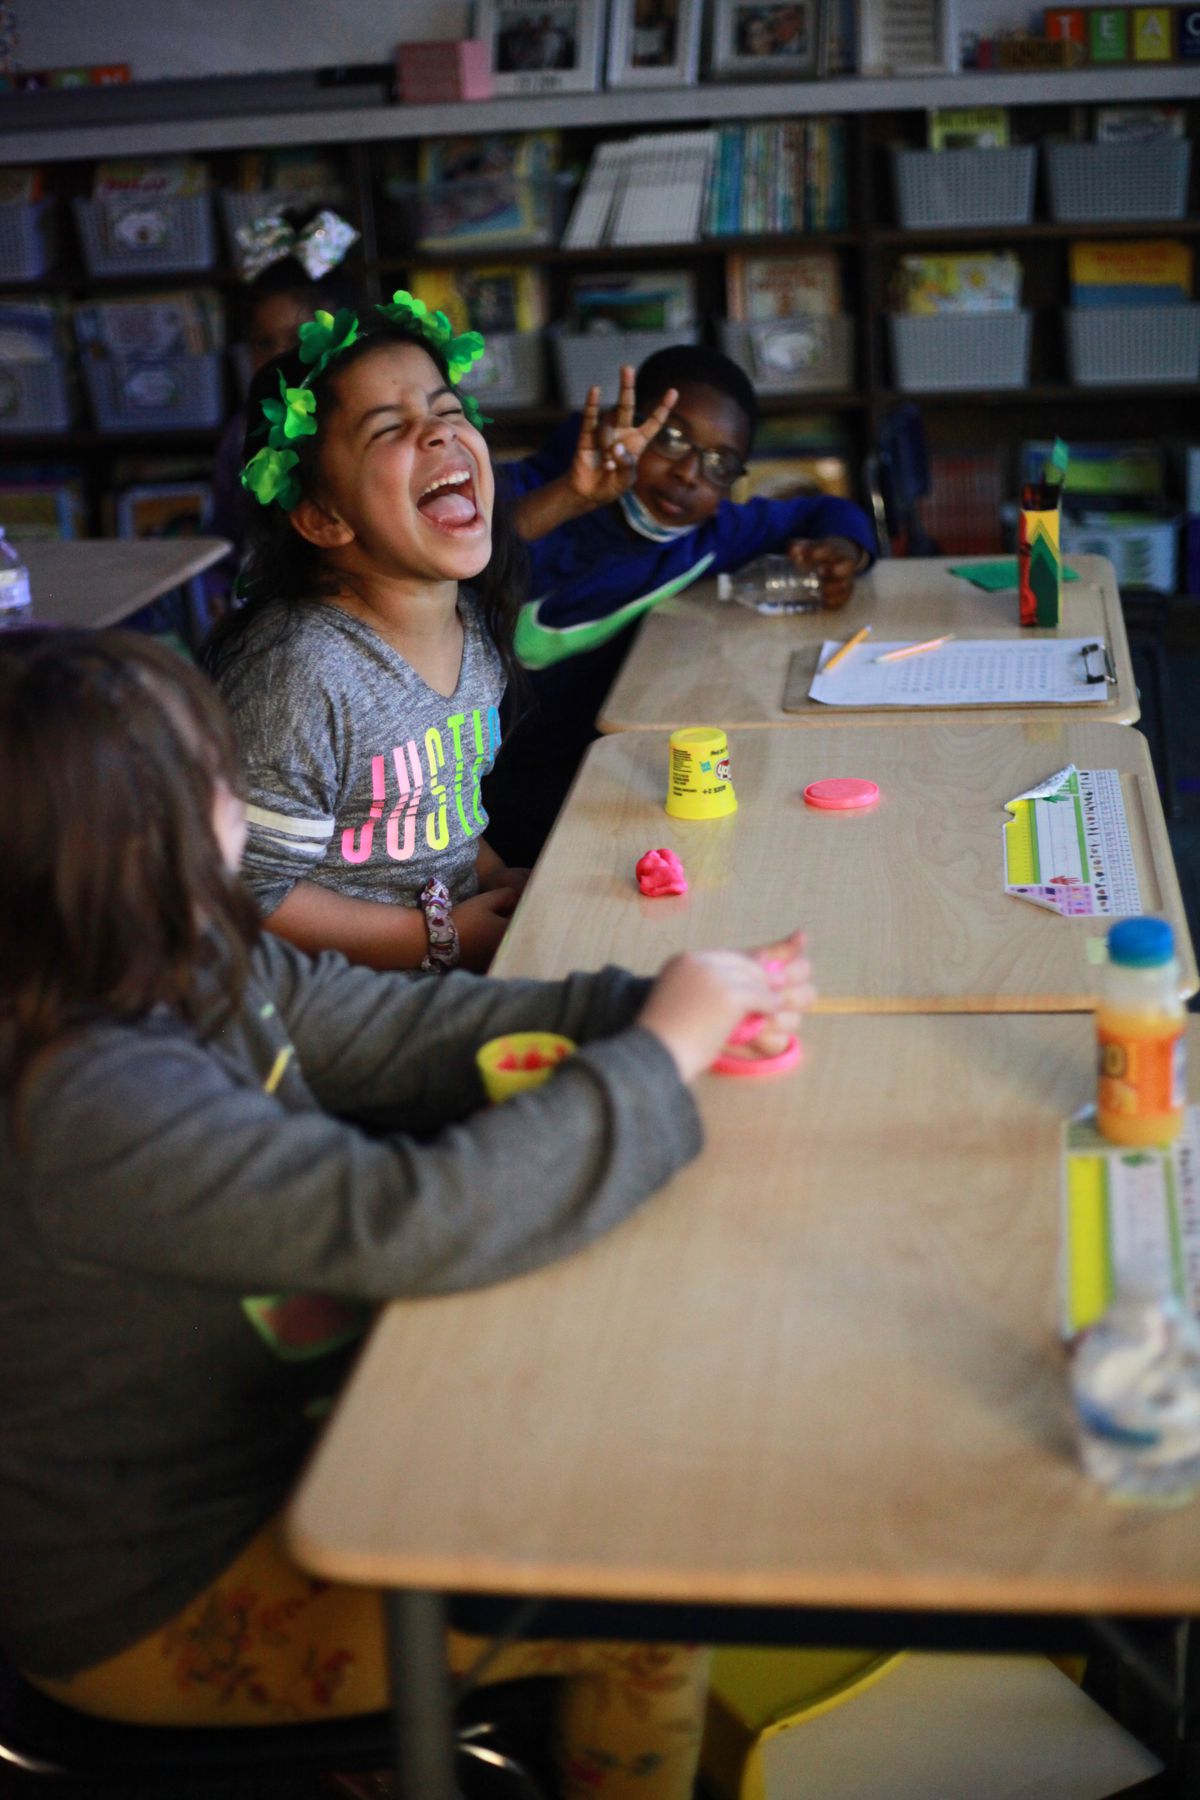 Three students are seated at their desks during an indoor recess.  A young girl in the middle shouts insistently as a boy next to her gestures with his fingers.